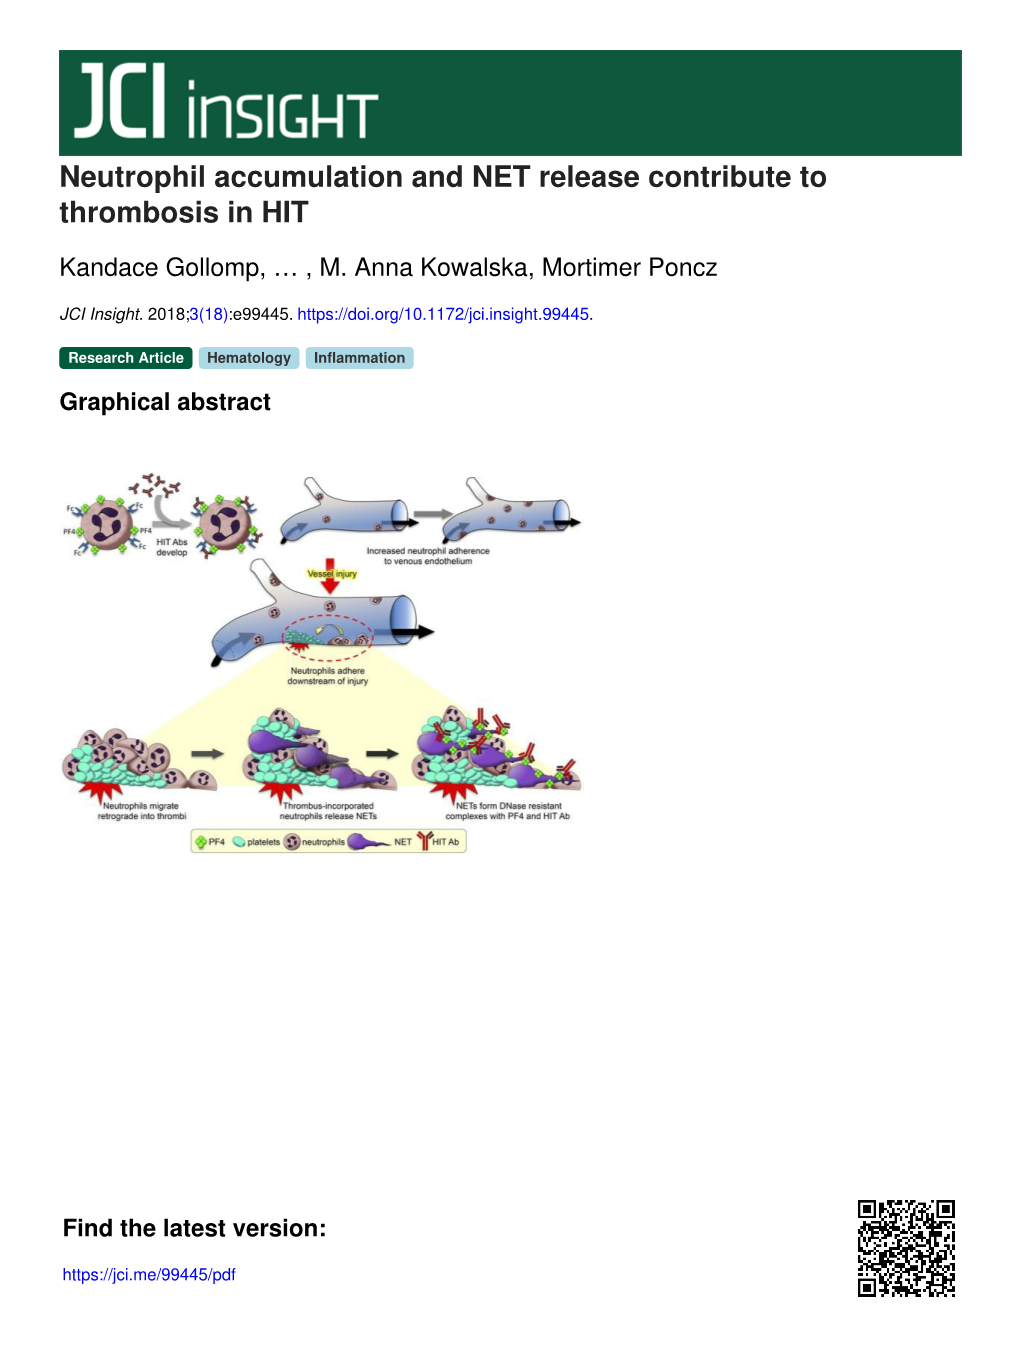 Neutrophil Accumulation and NET Release Contribute to Thrombosis in HIT